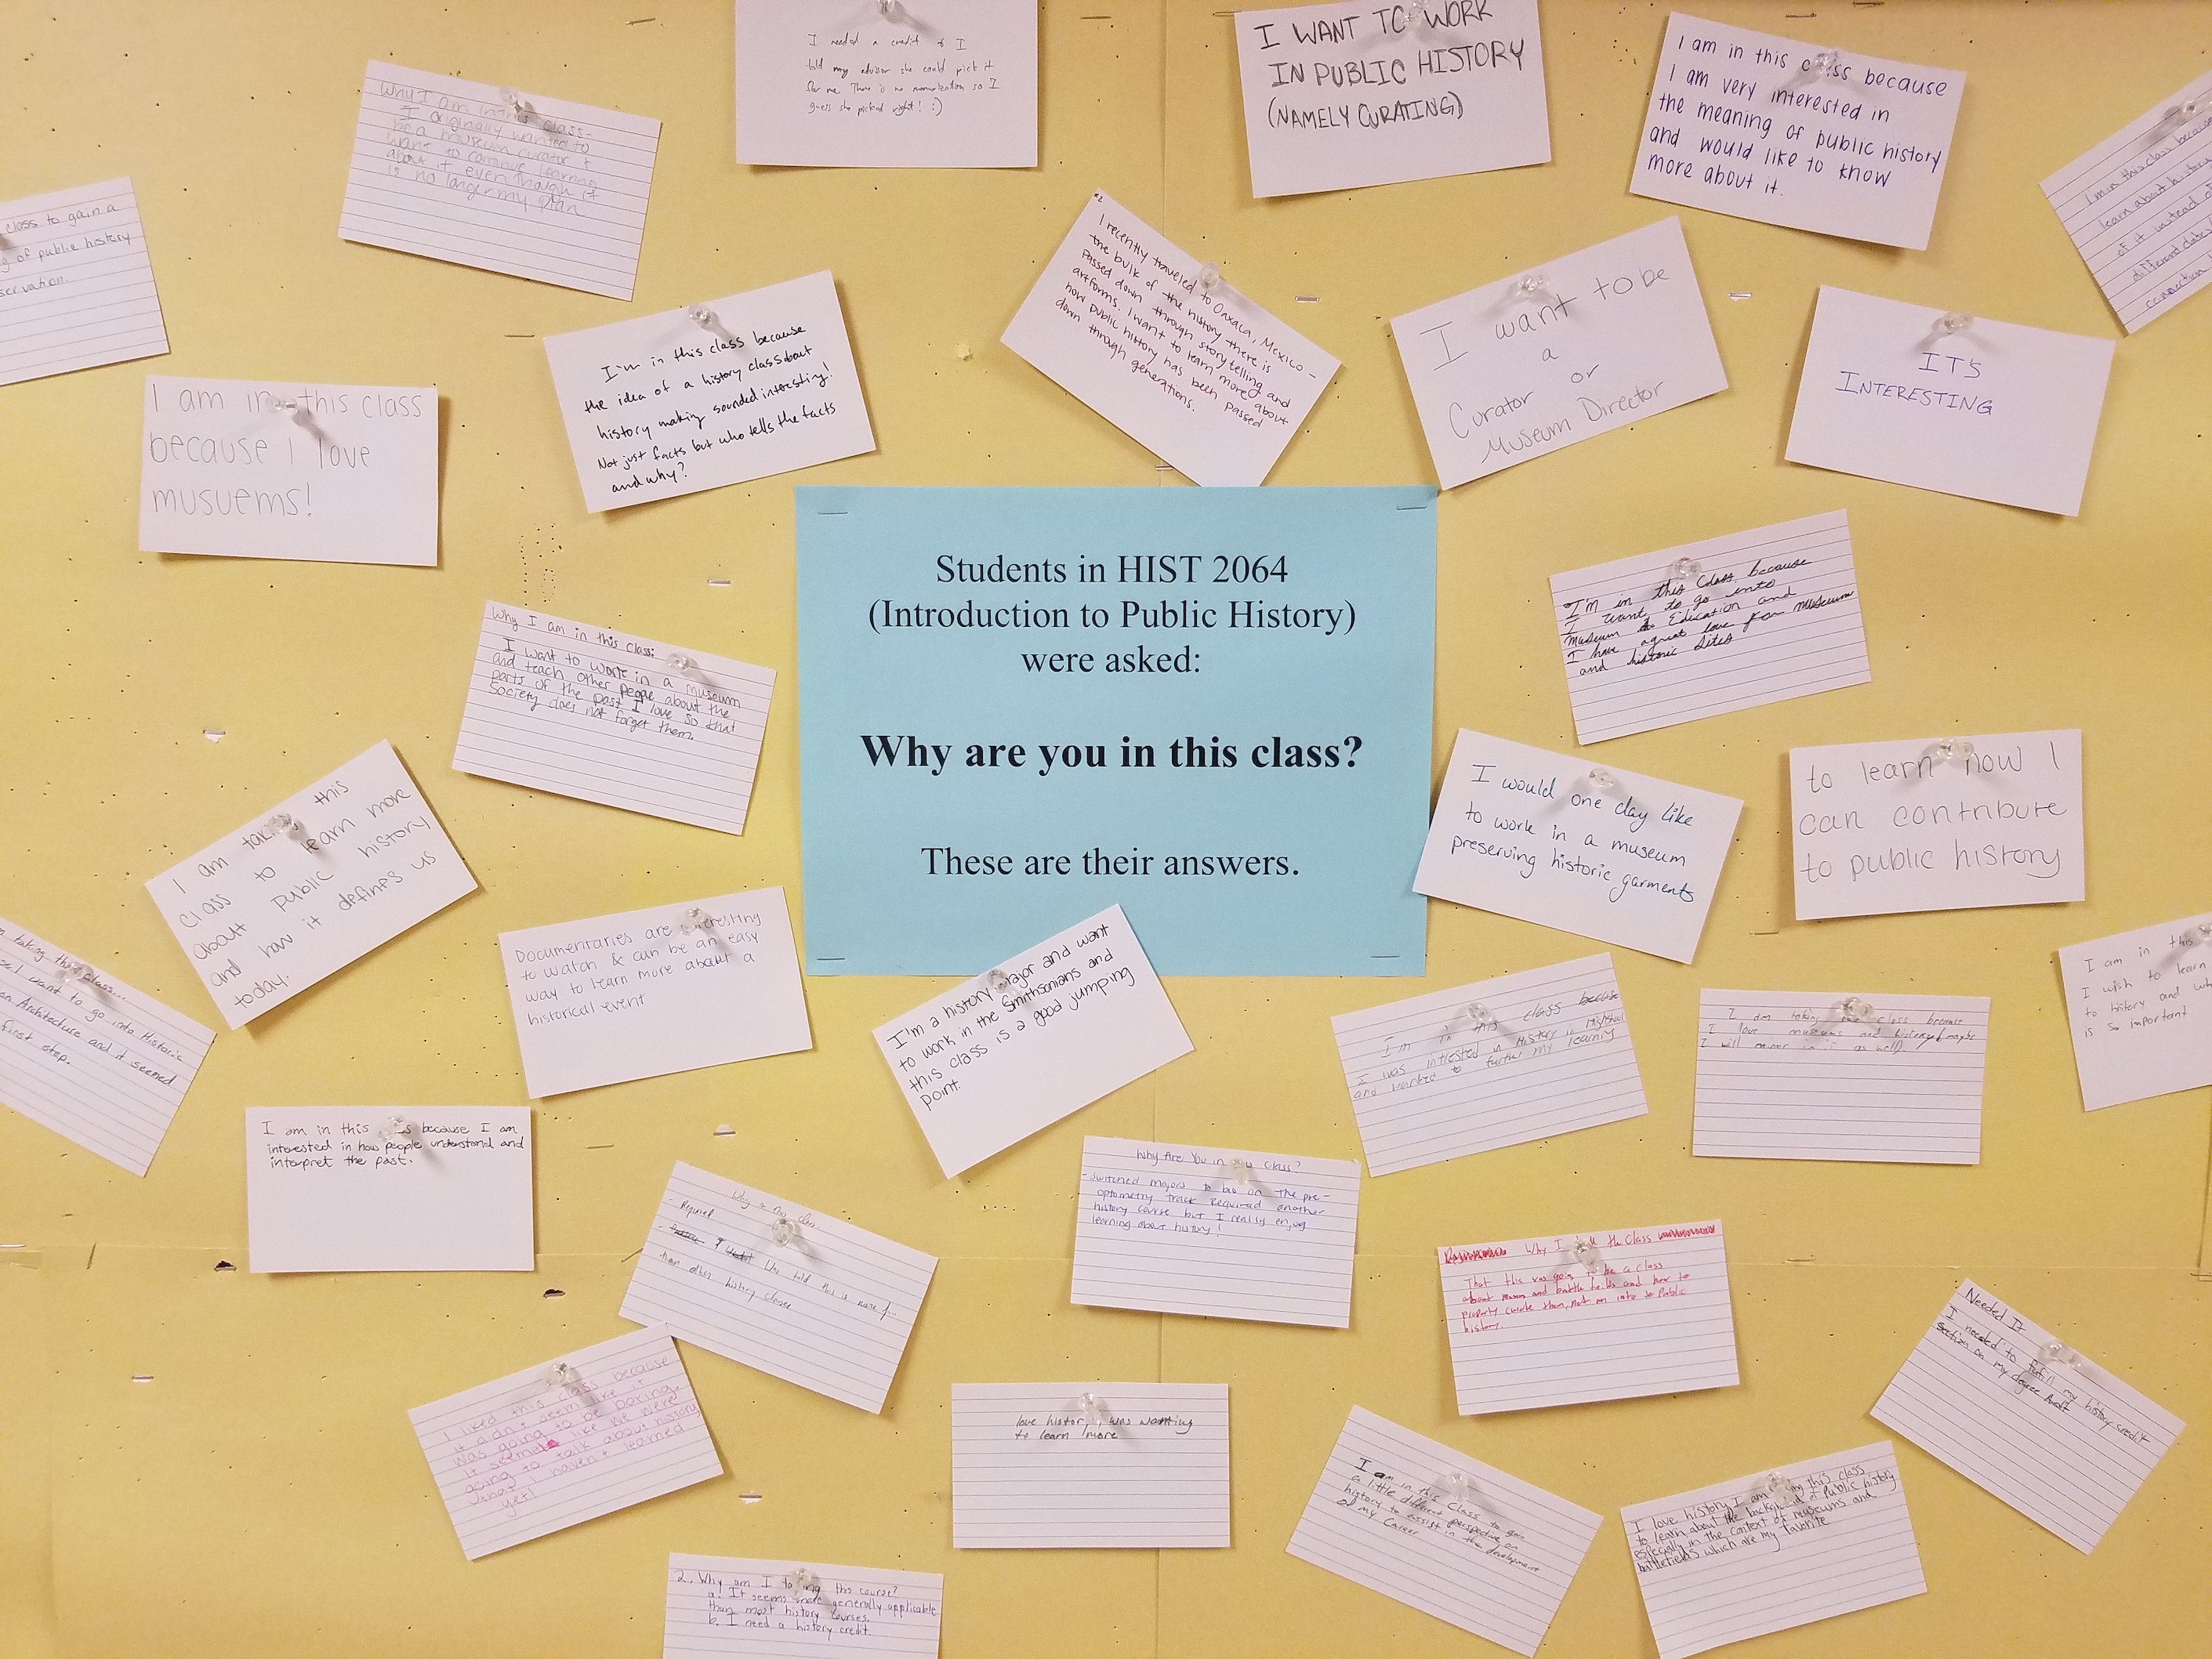 photograph of a bulletin board covered with index cards explaining why student took the public history class